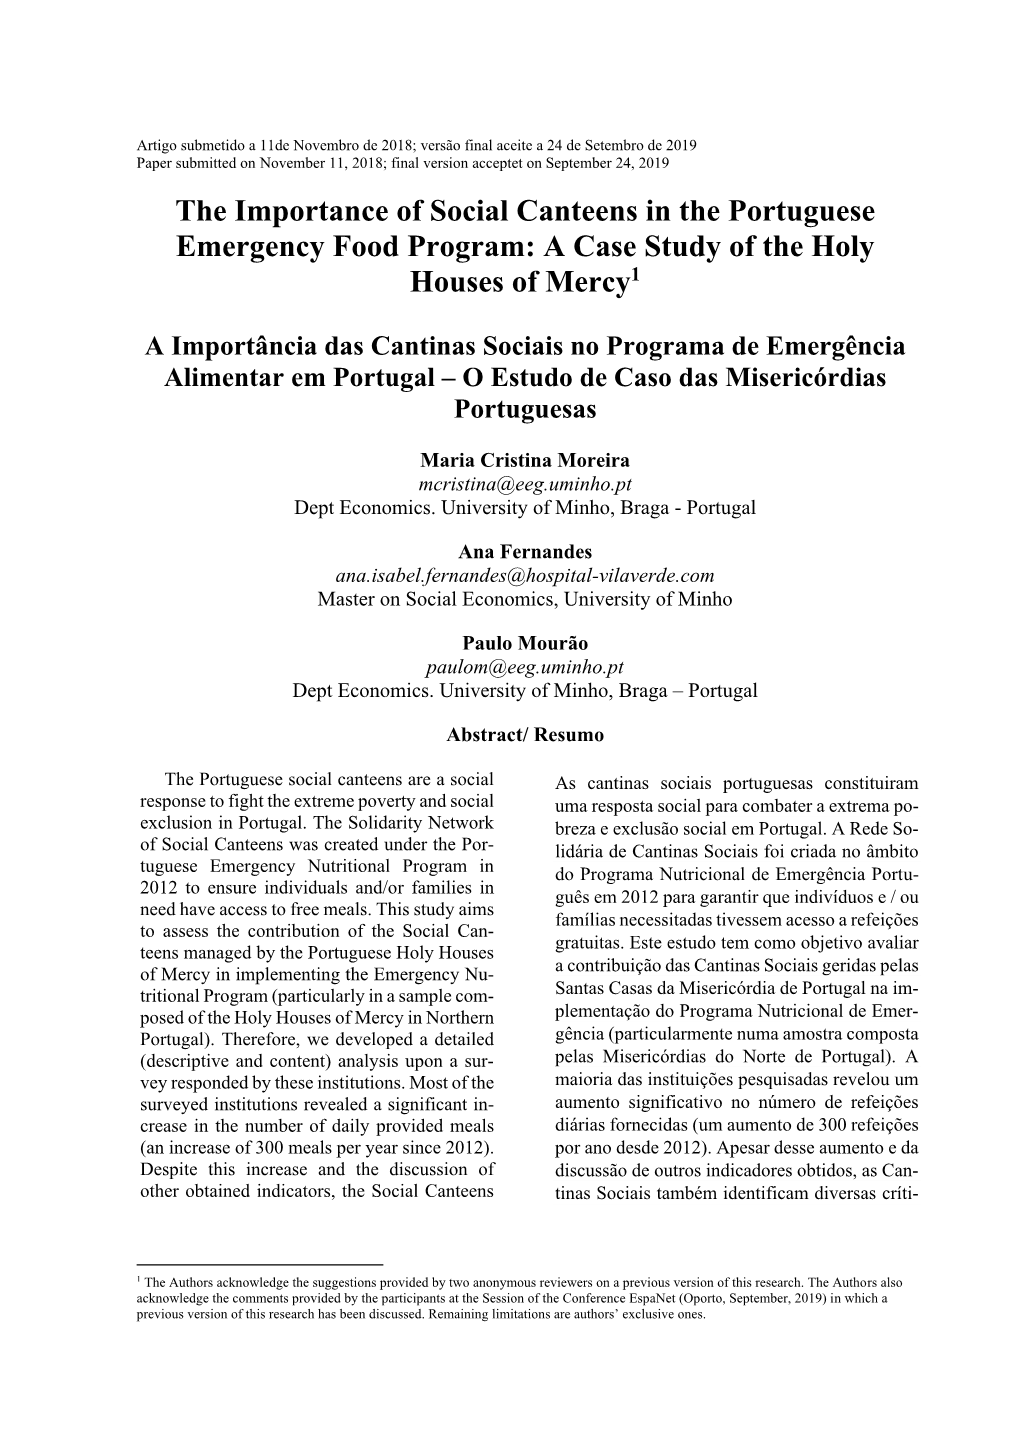 The Importance of Social Canteens in the Portuguese Emergency Food Program: a Case Study of the Holy Houses of Mercy1